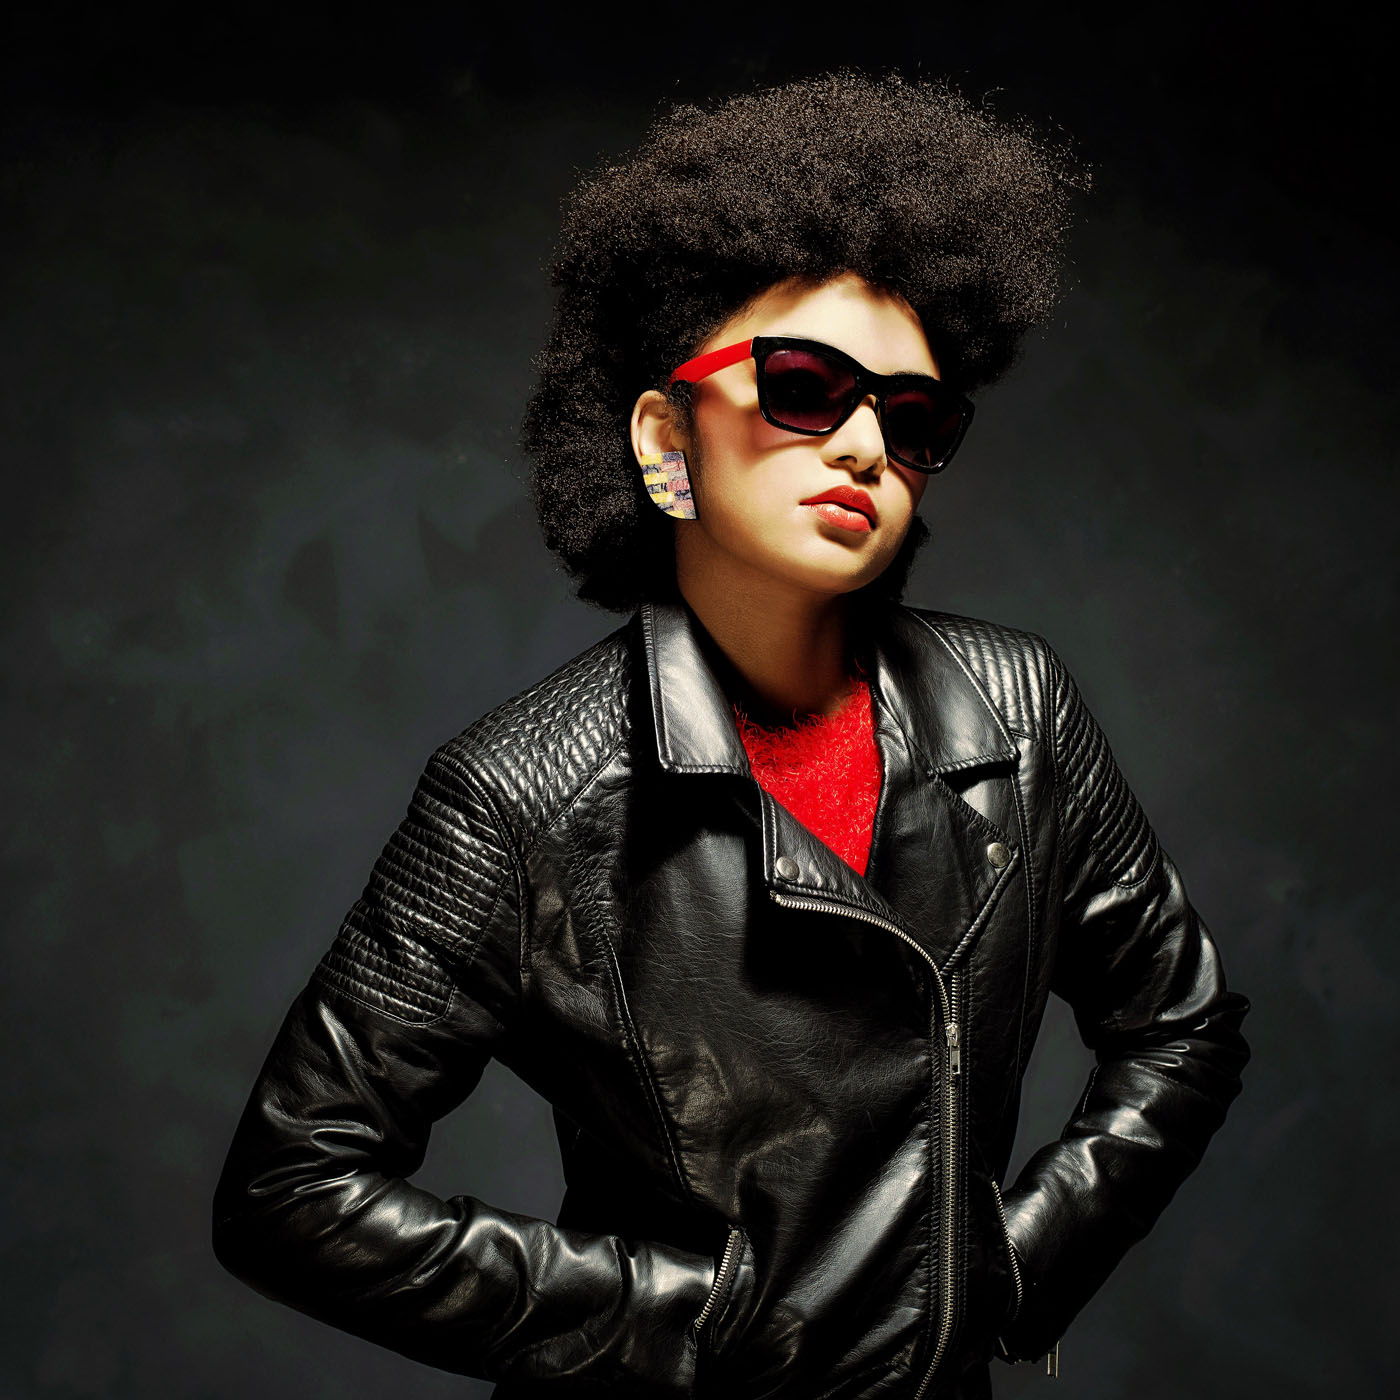 Half Body Shot of a Stylish Young Woman Wearing Black Leather Jacket with Sunglasses Against Black Background.